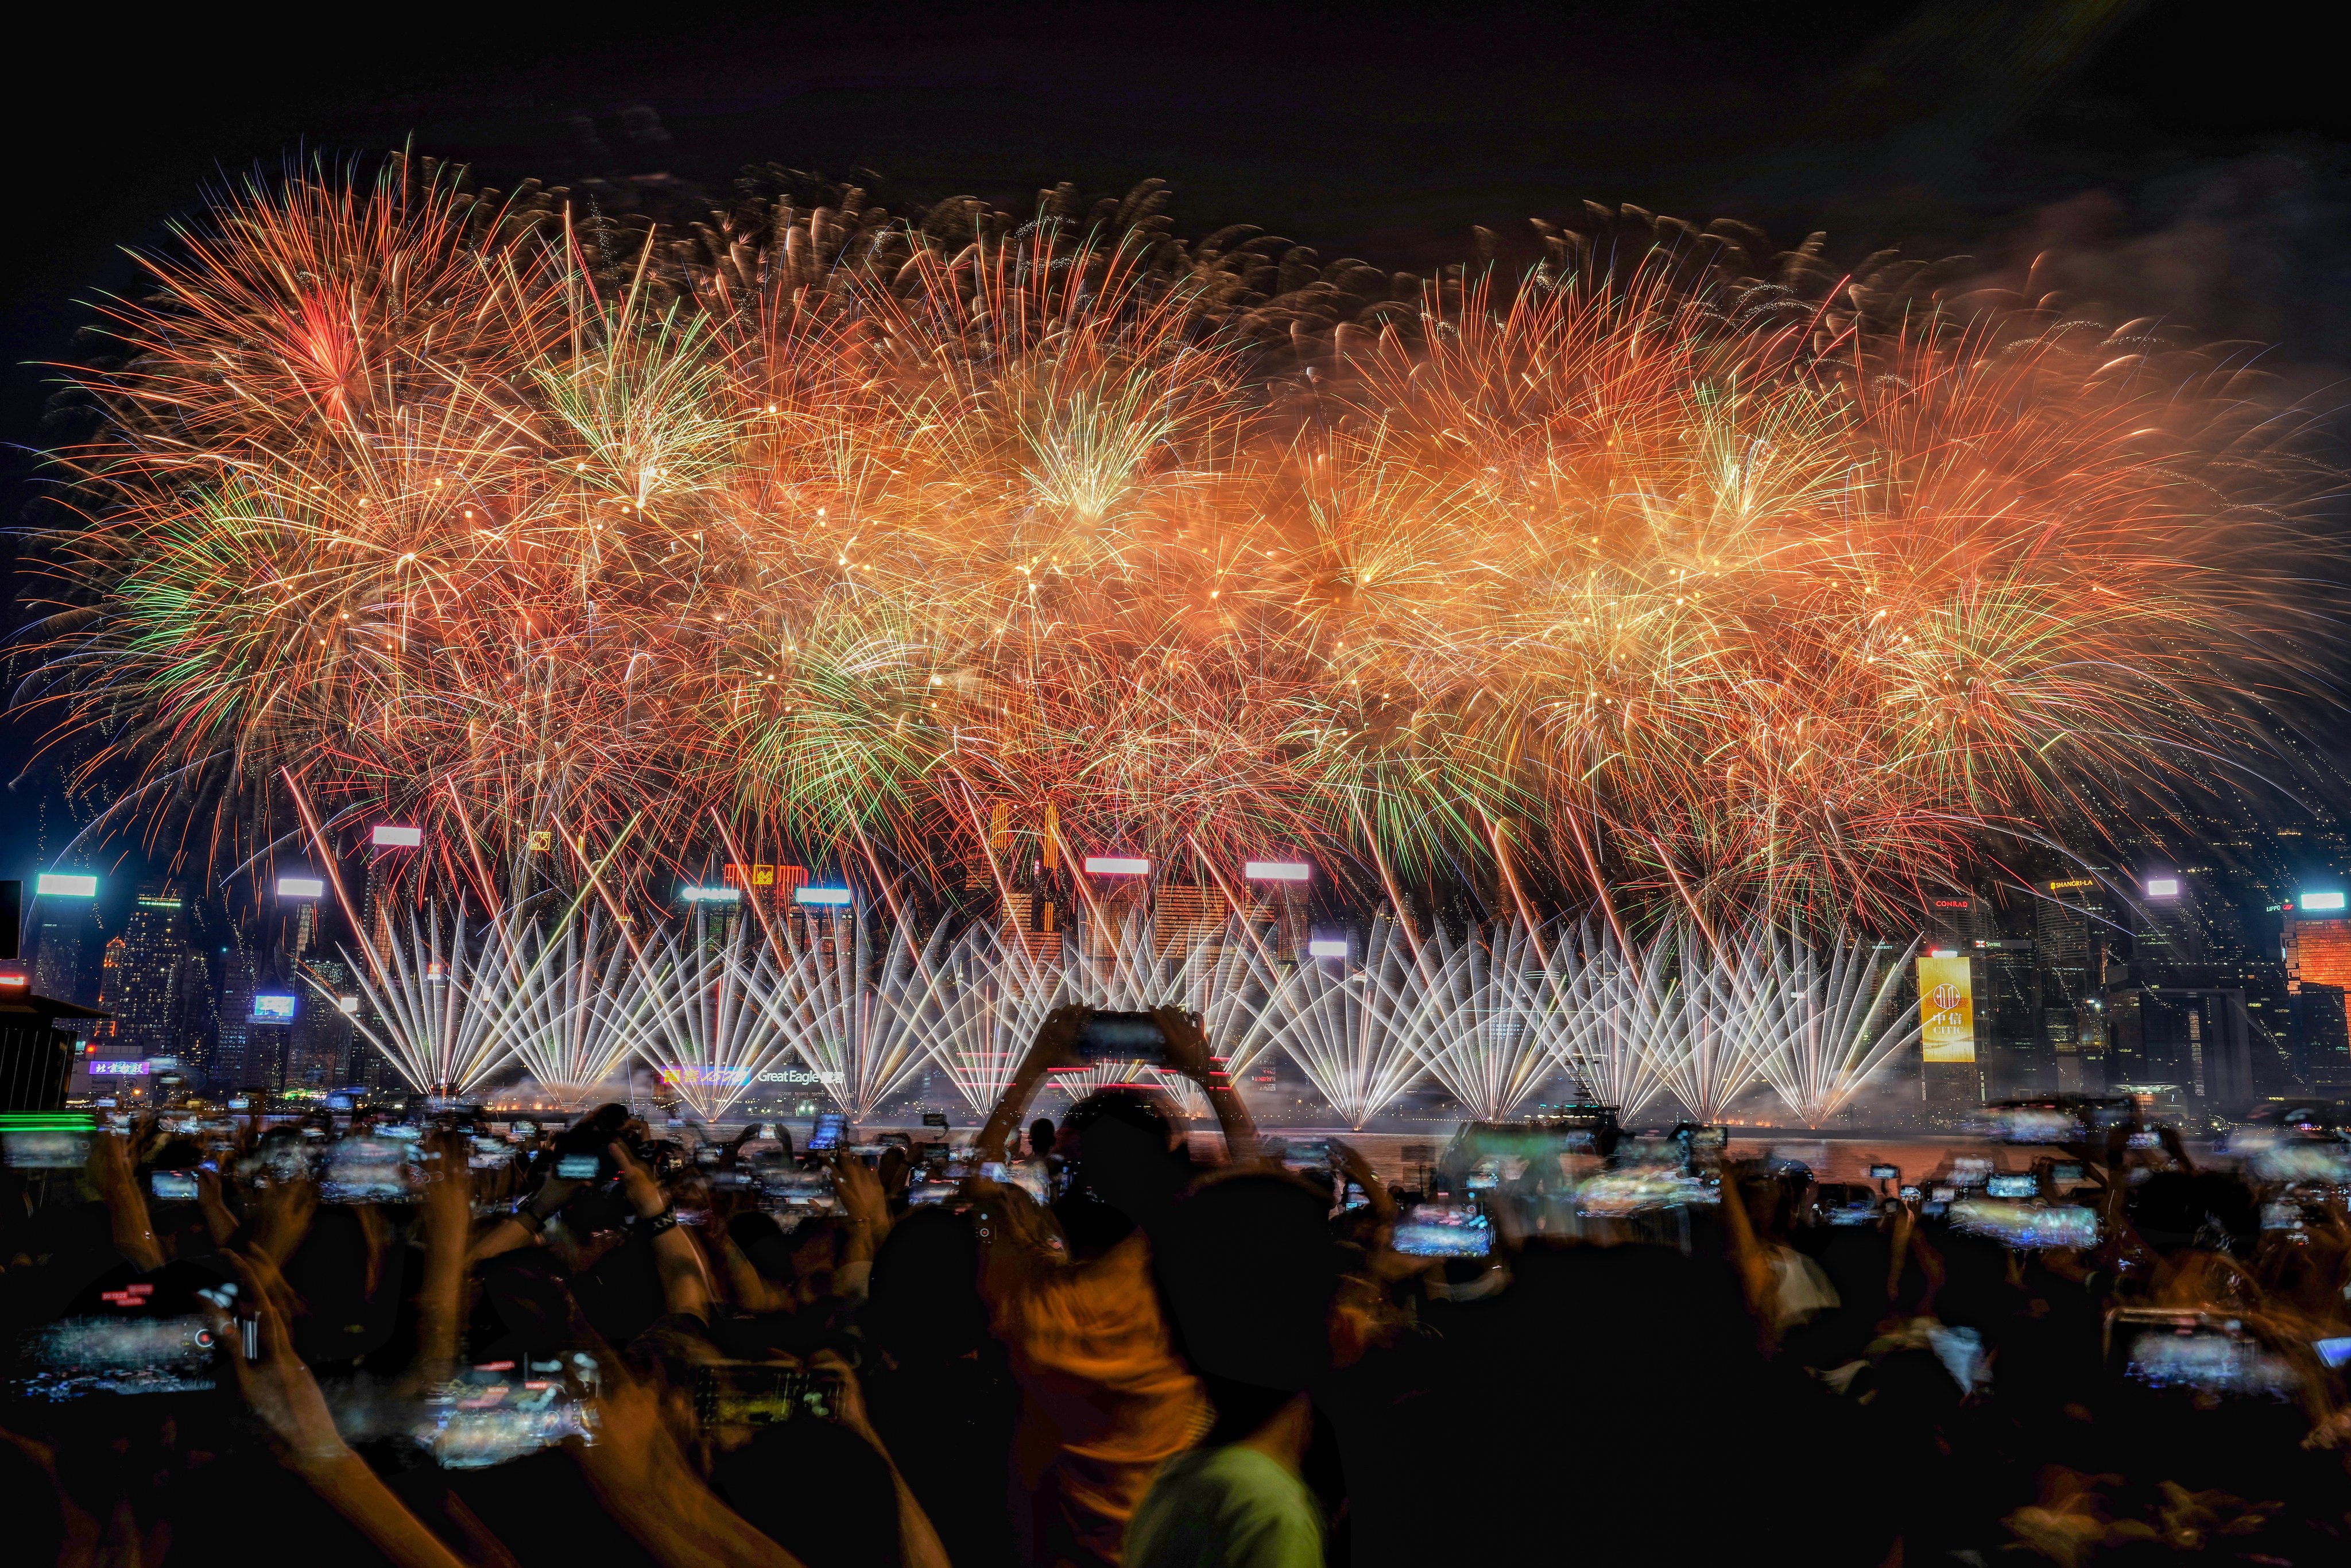 Hong Kong on Sunday welcomed back its National Day fireworks display. Photo: Elson LI